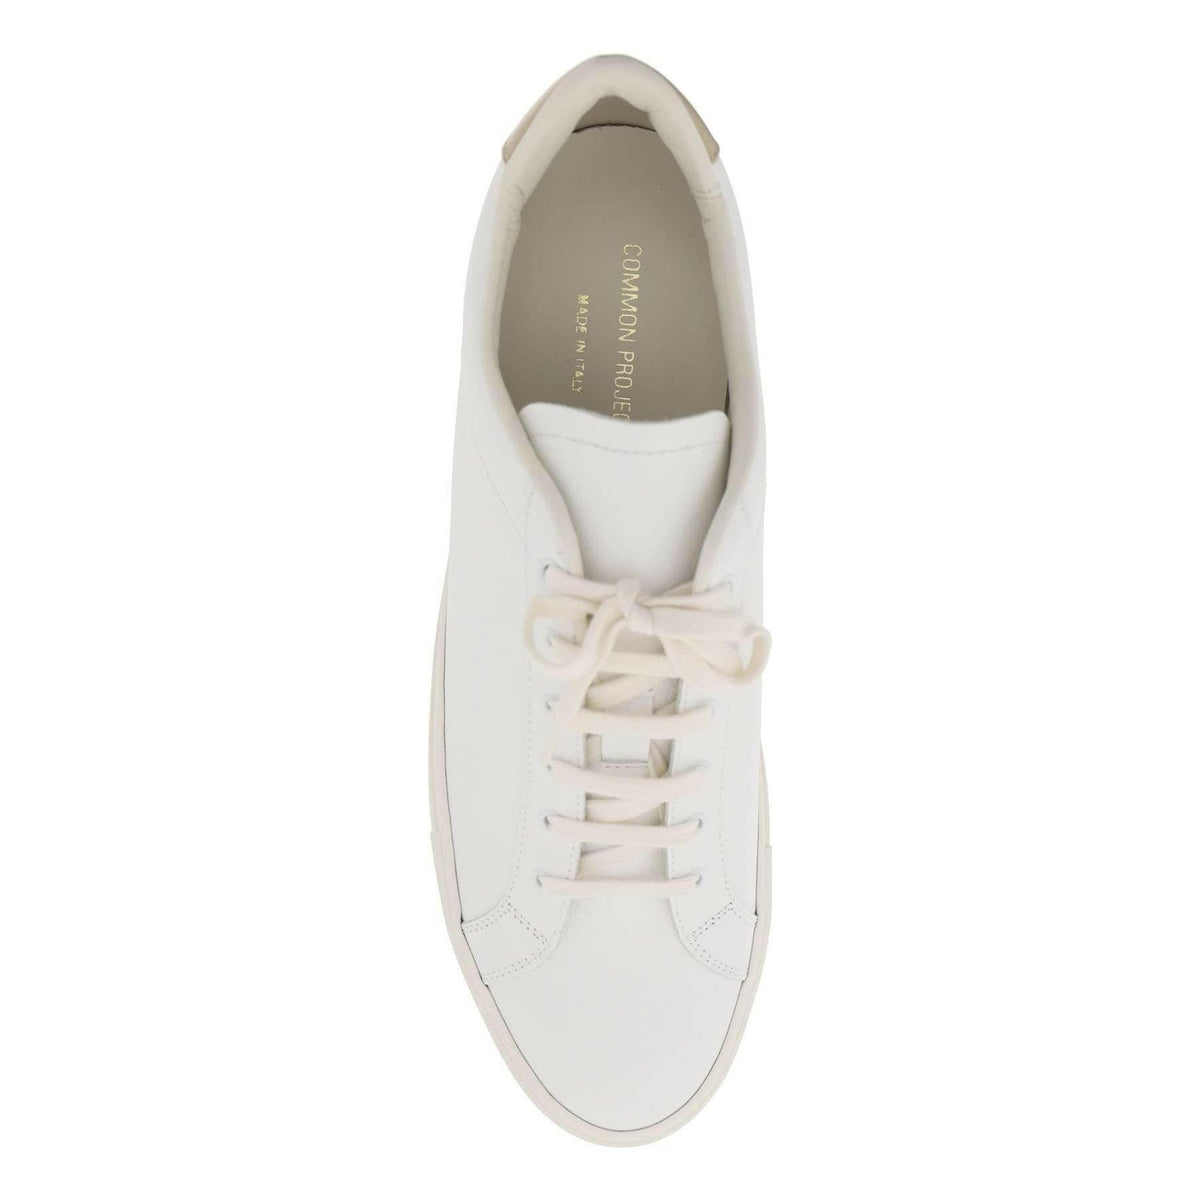 White Tan Retro Low-Top Leather Sneakers COMMON PROJECTS JOHN JULIA.